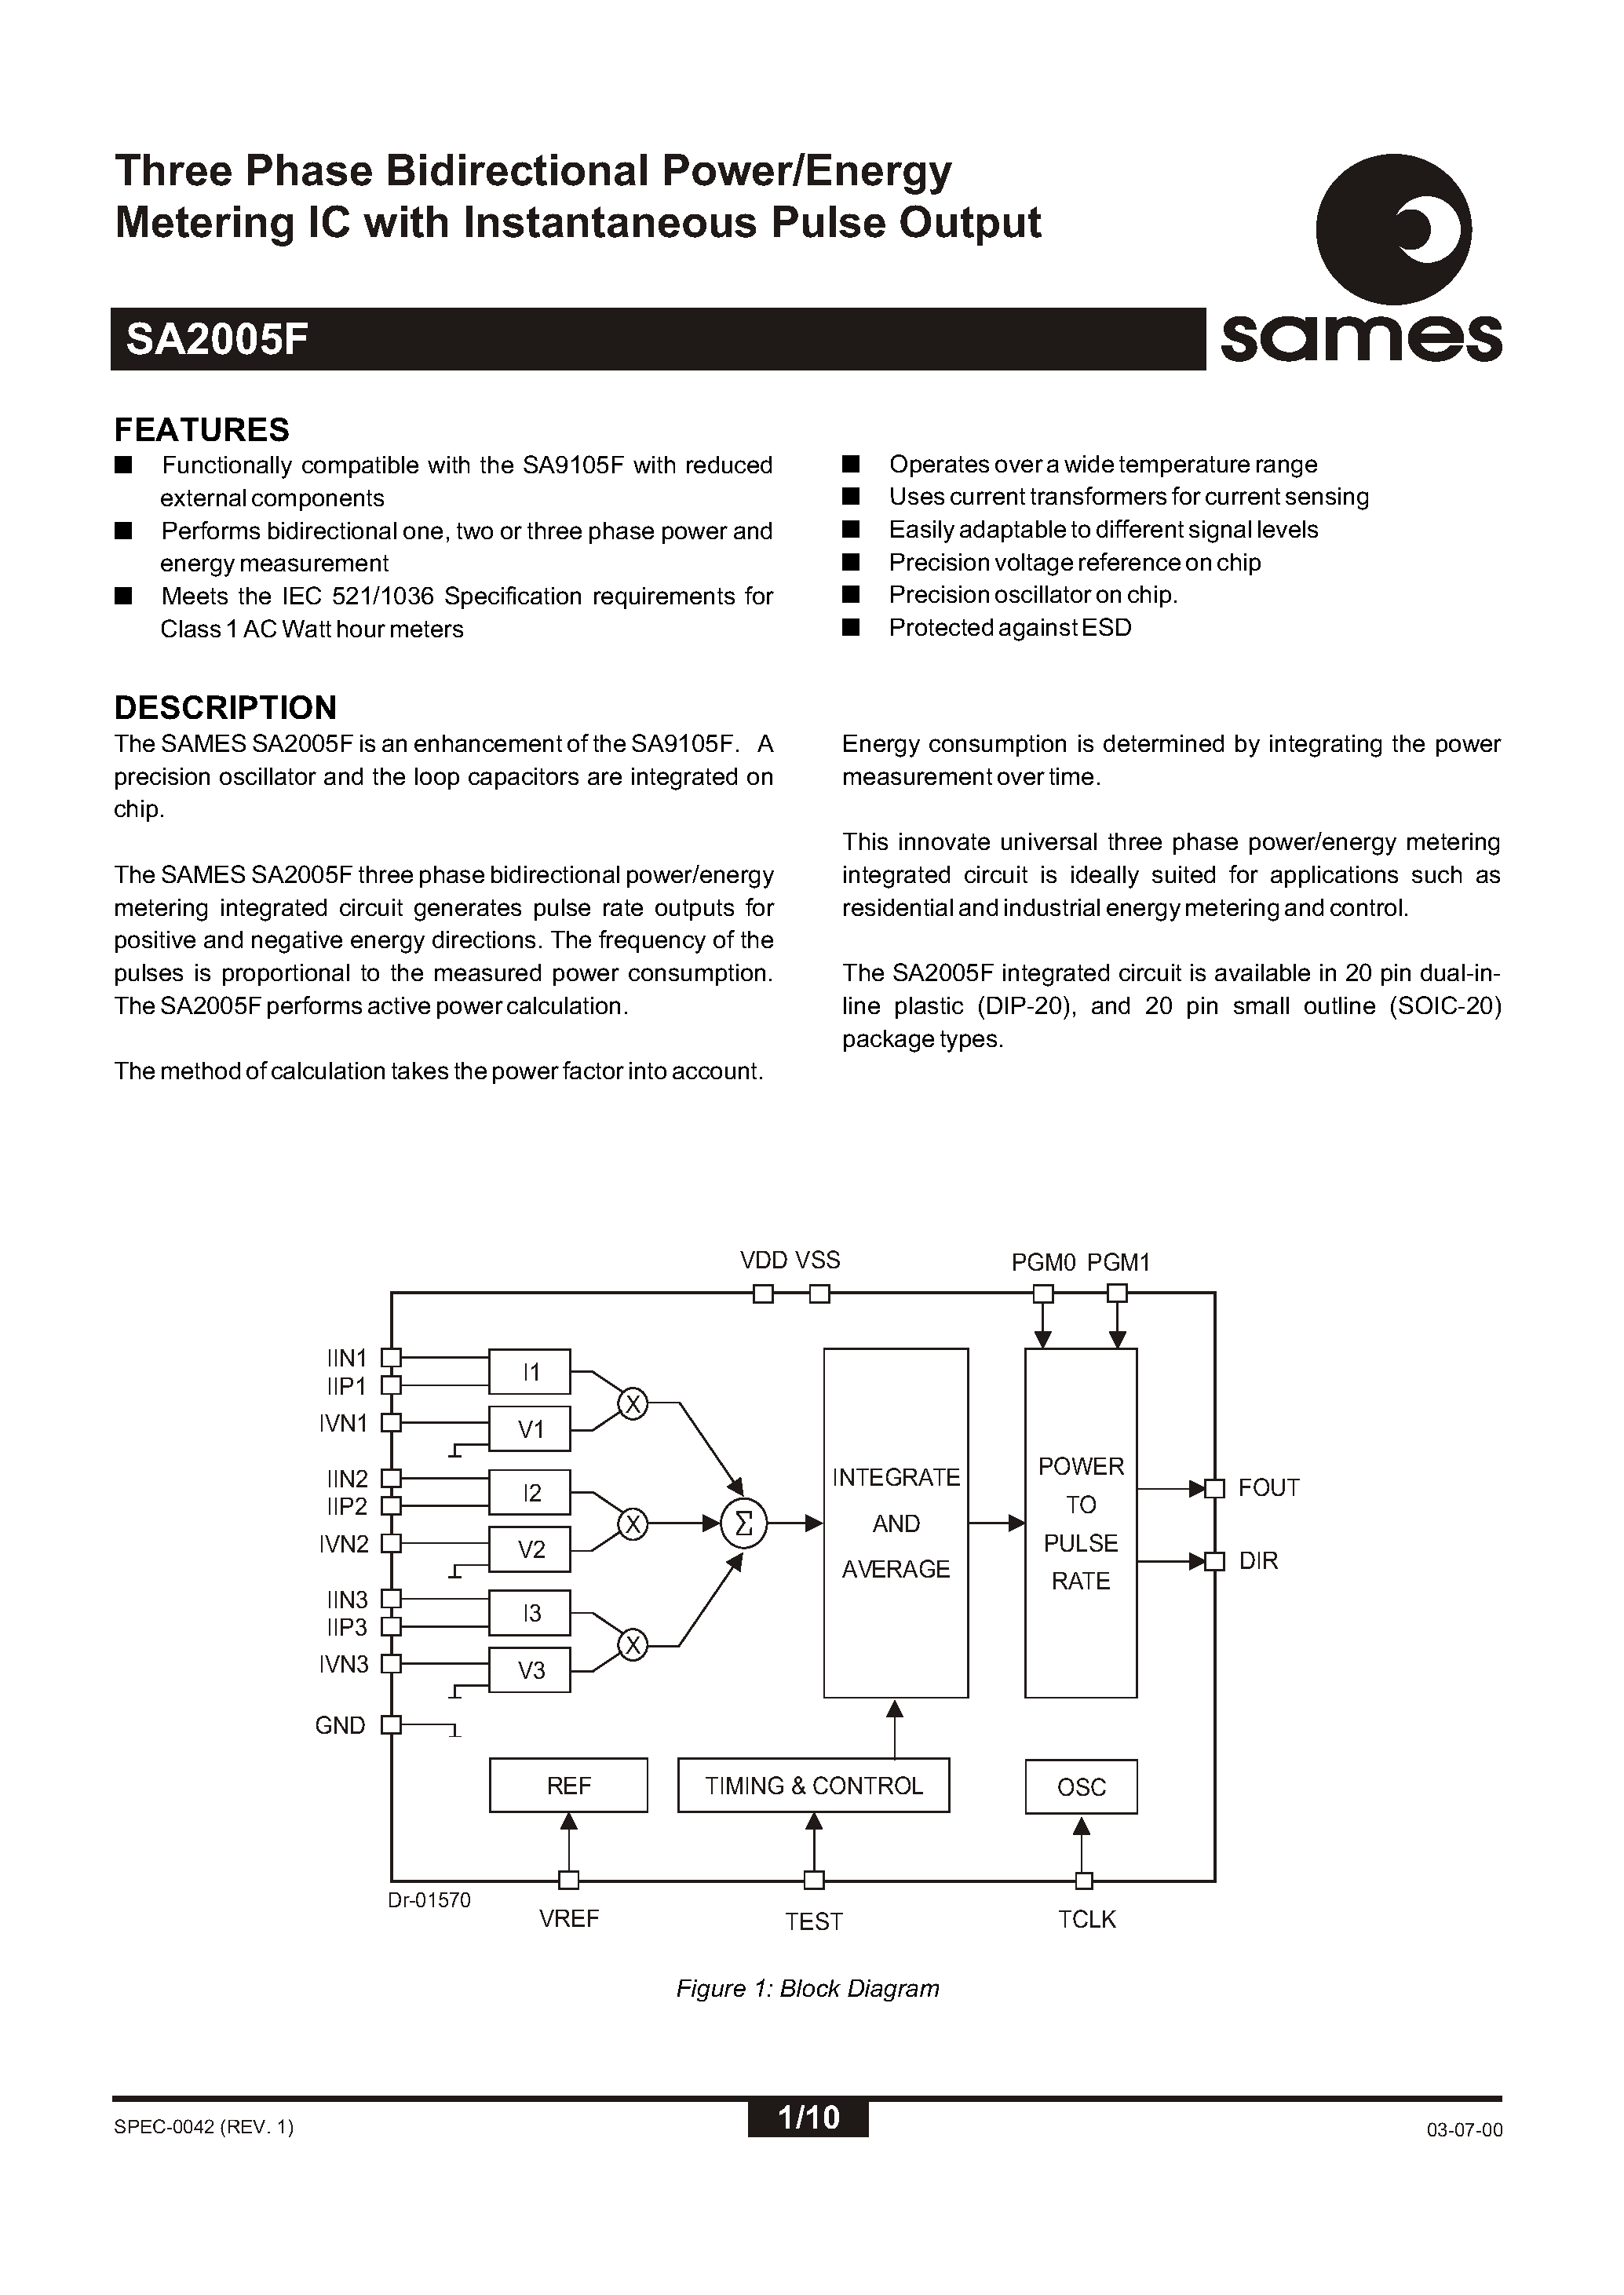 Datasheet SA2005FPA - Three Phase Bidirectional Power/Energy Metering IC with Instantaneous Pulse Output page 1